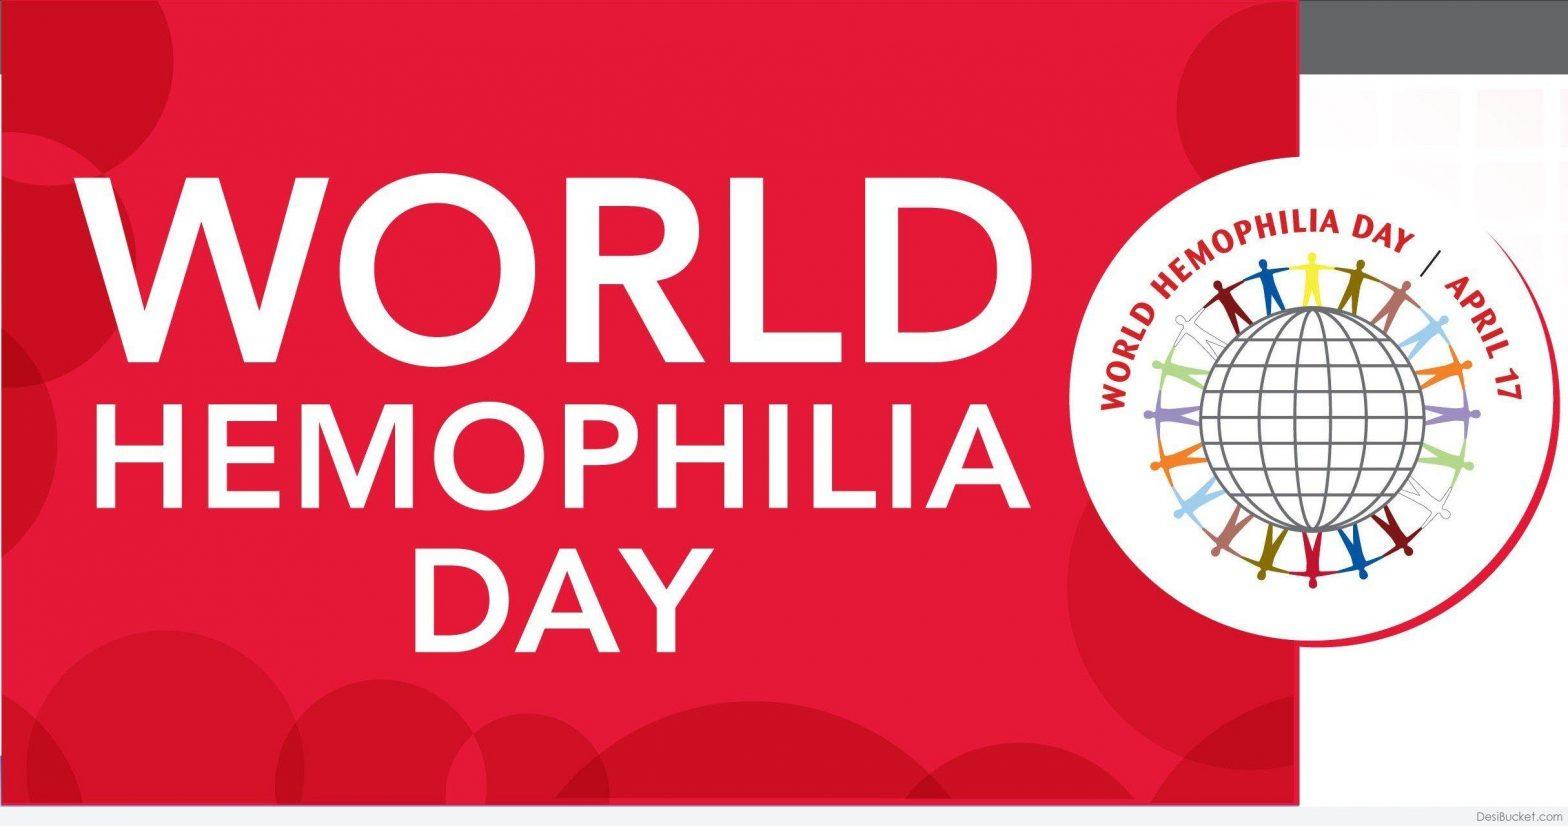 World Hemophilia Day Observed Globally On 17 April